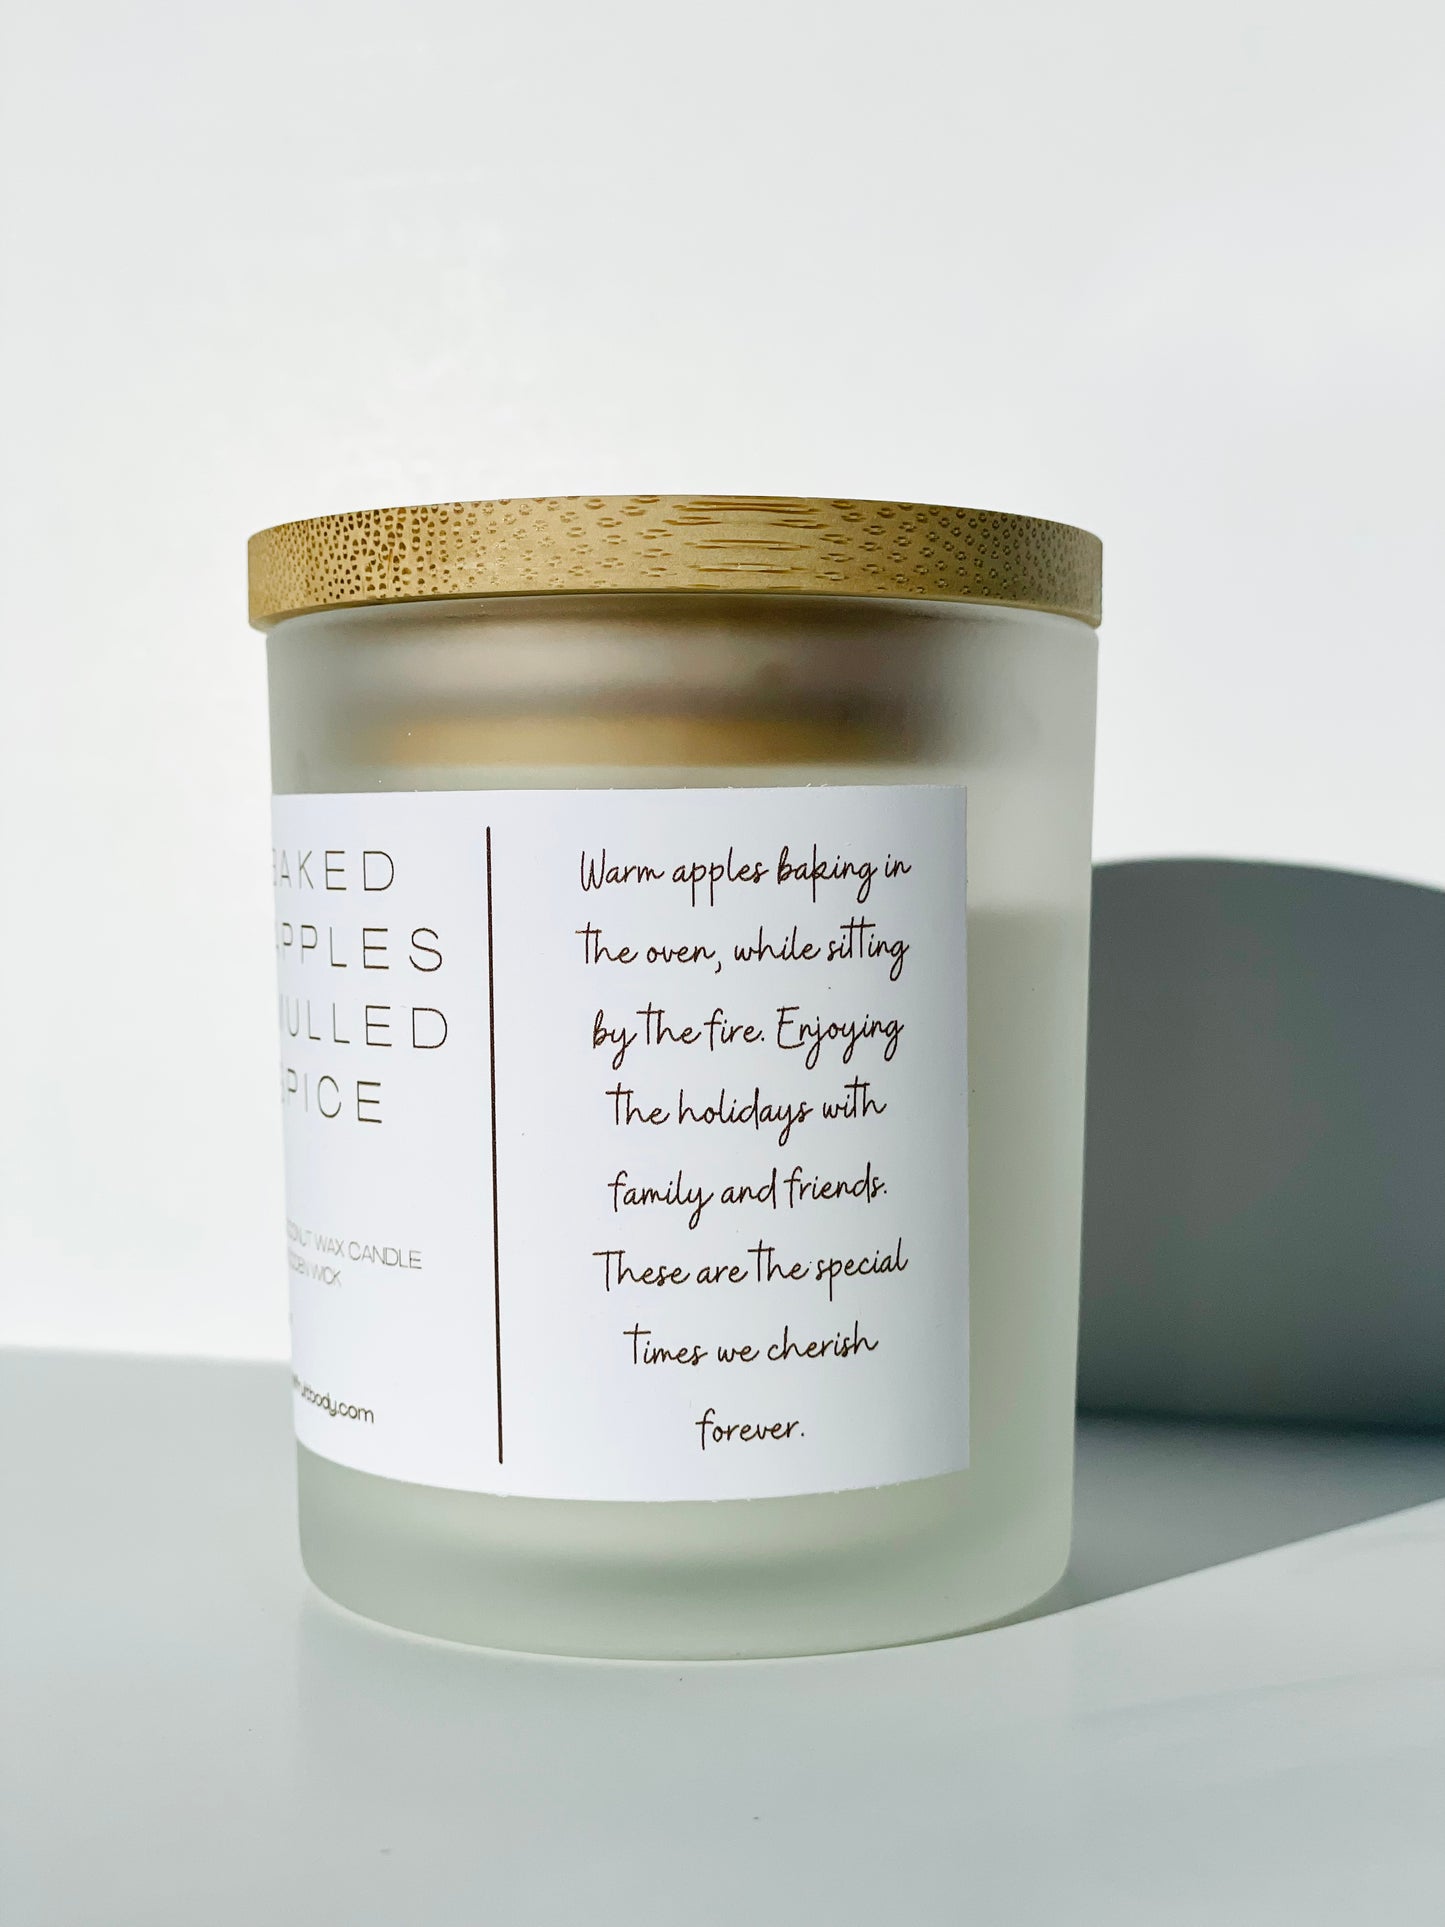 Real Fruit Body Organic Spa Candle 6.5 oz